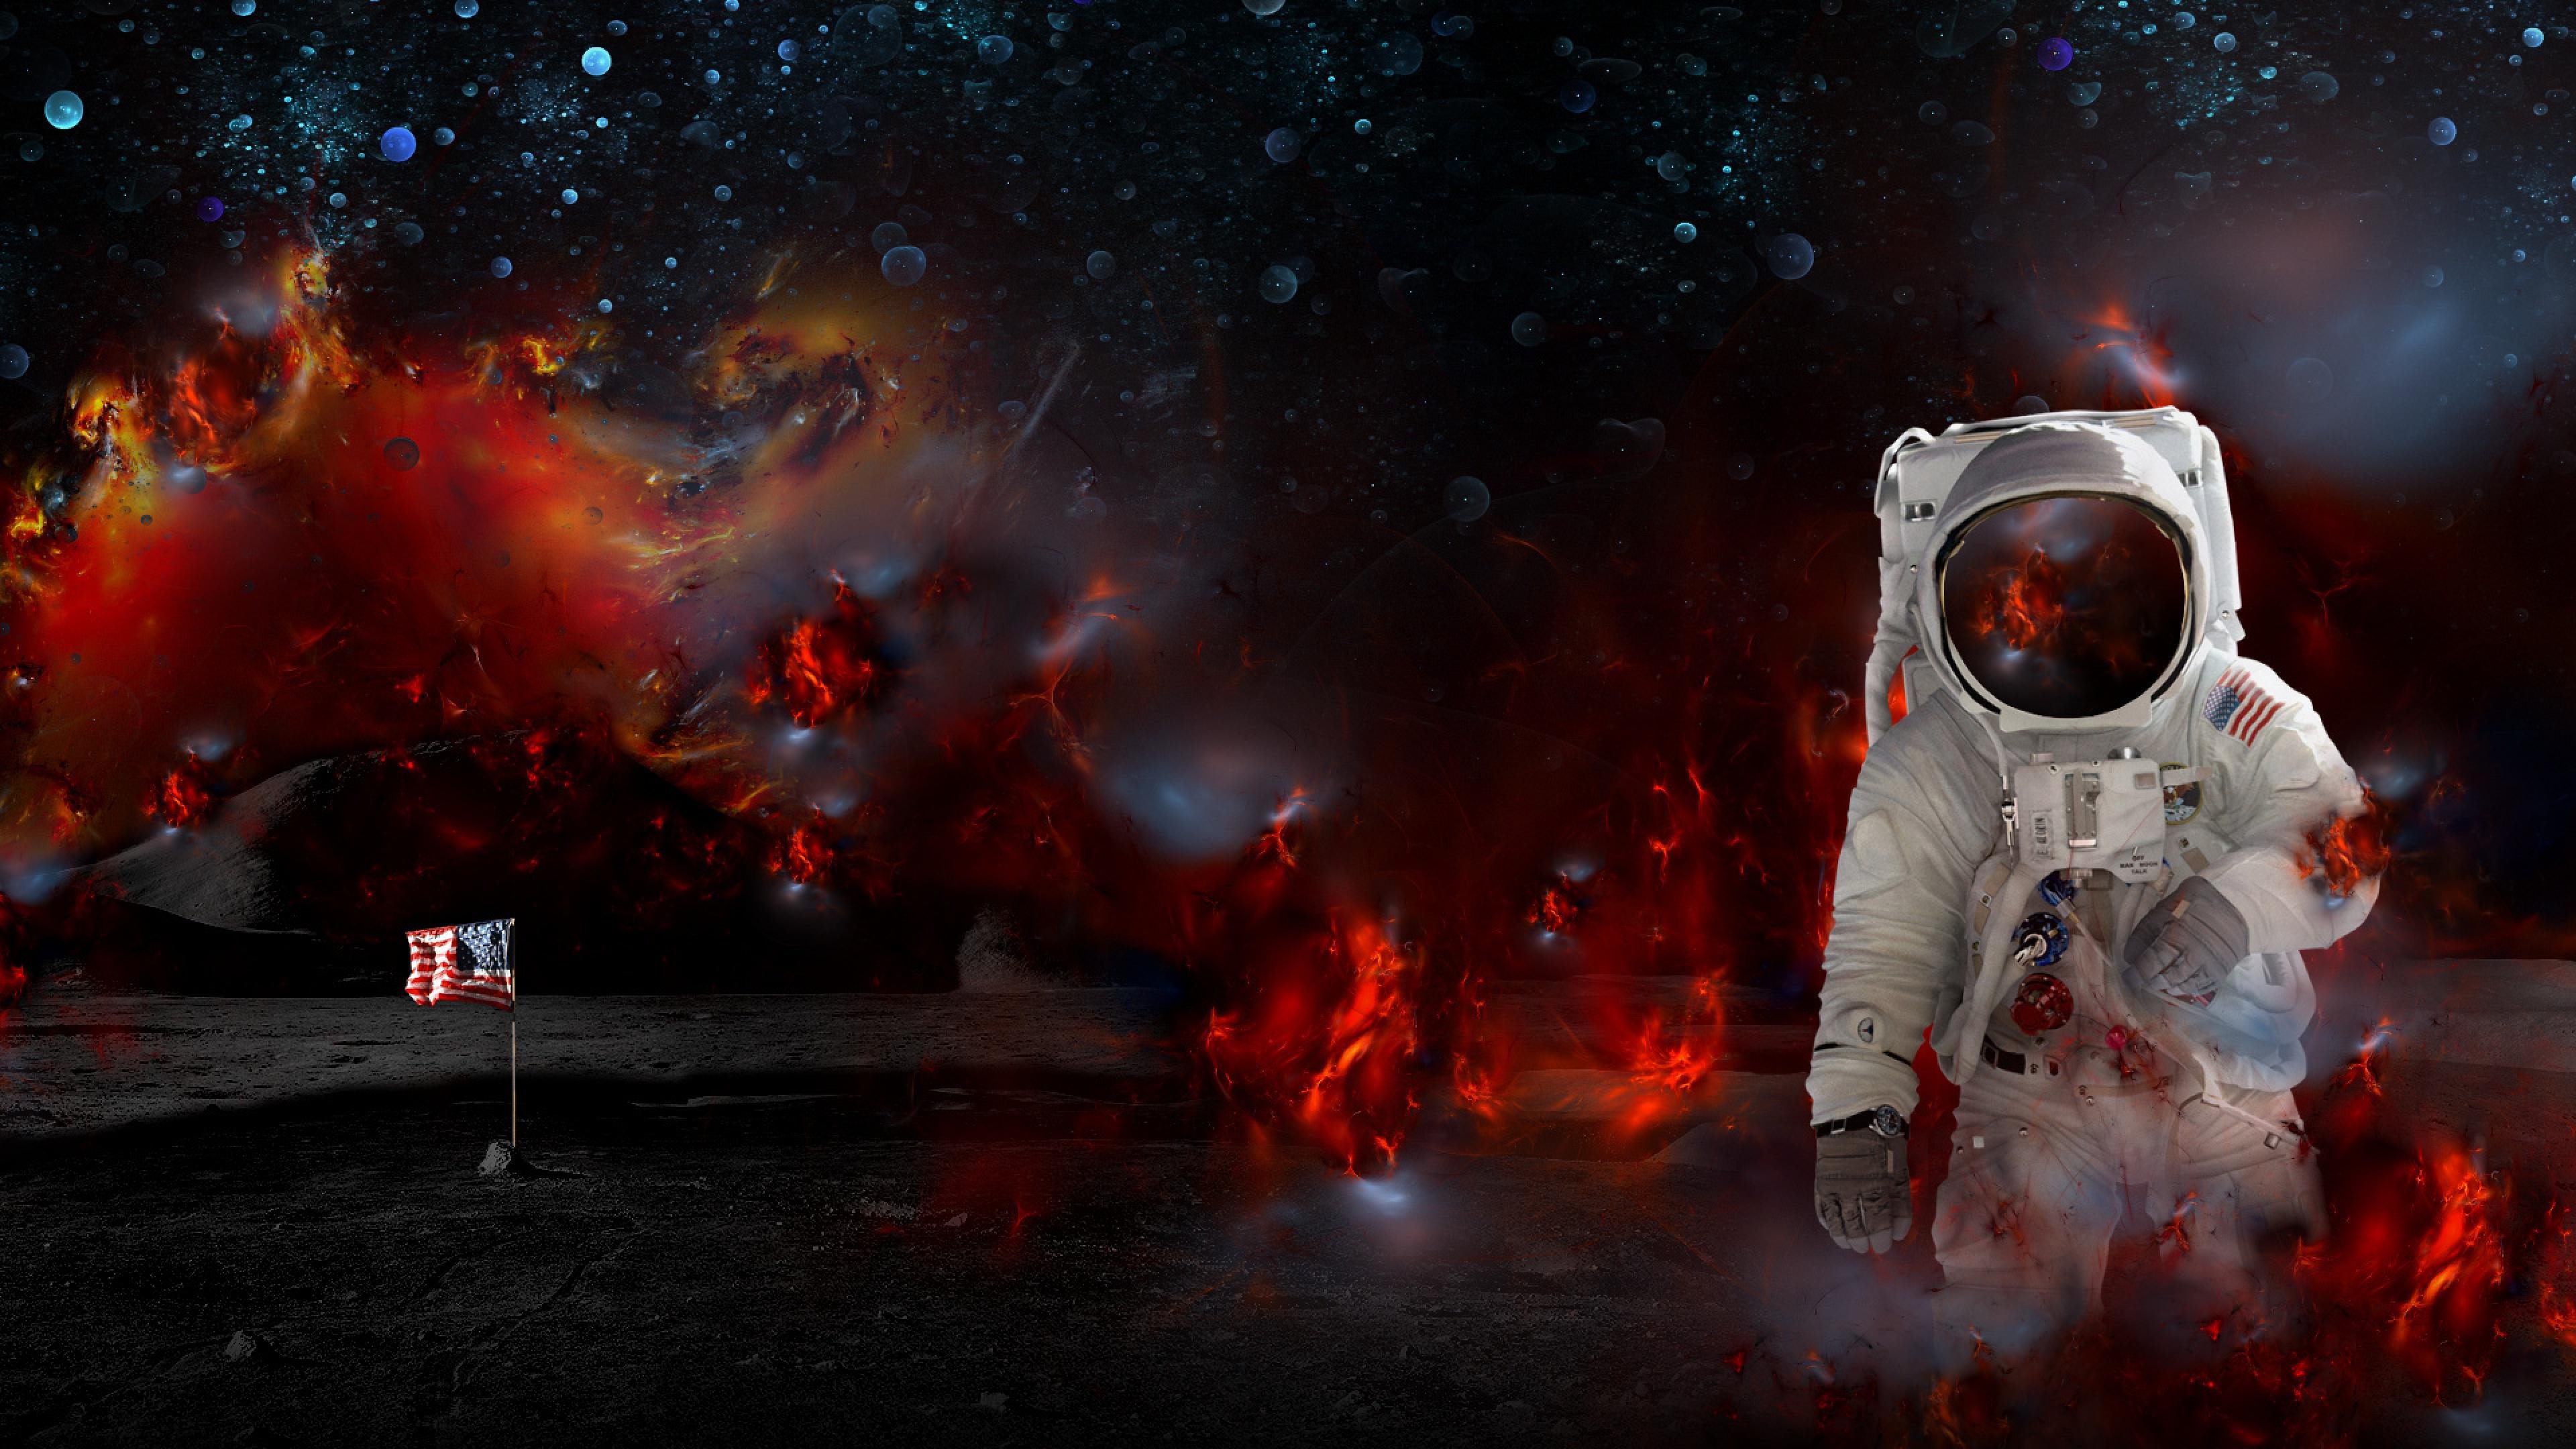 astronaut, Nasa, Space, Sci fi, Fire, Psychedelic Wallpaper